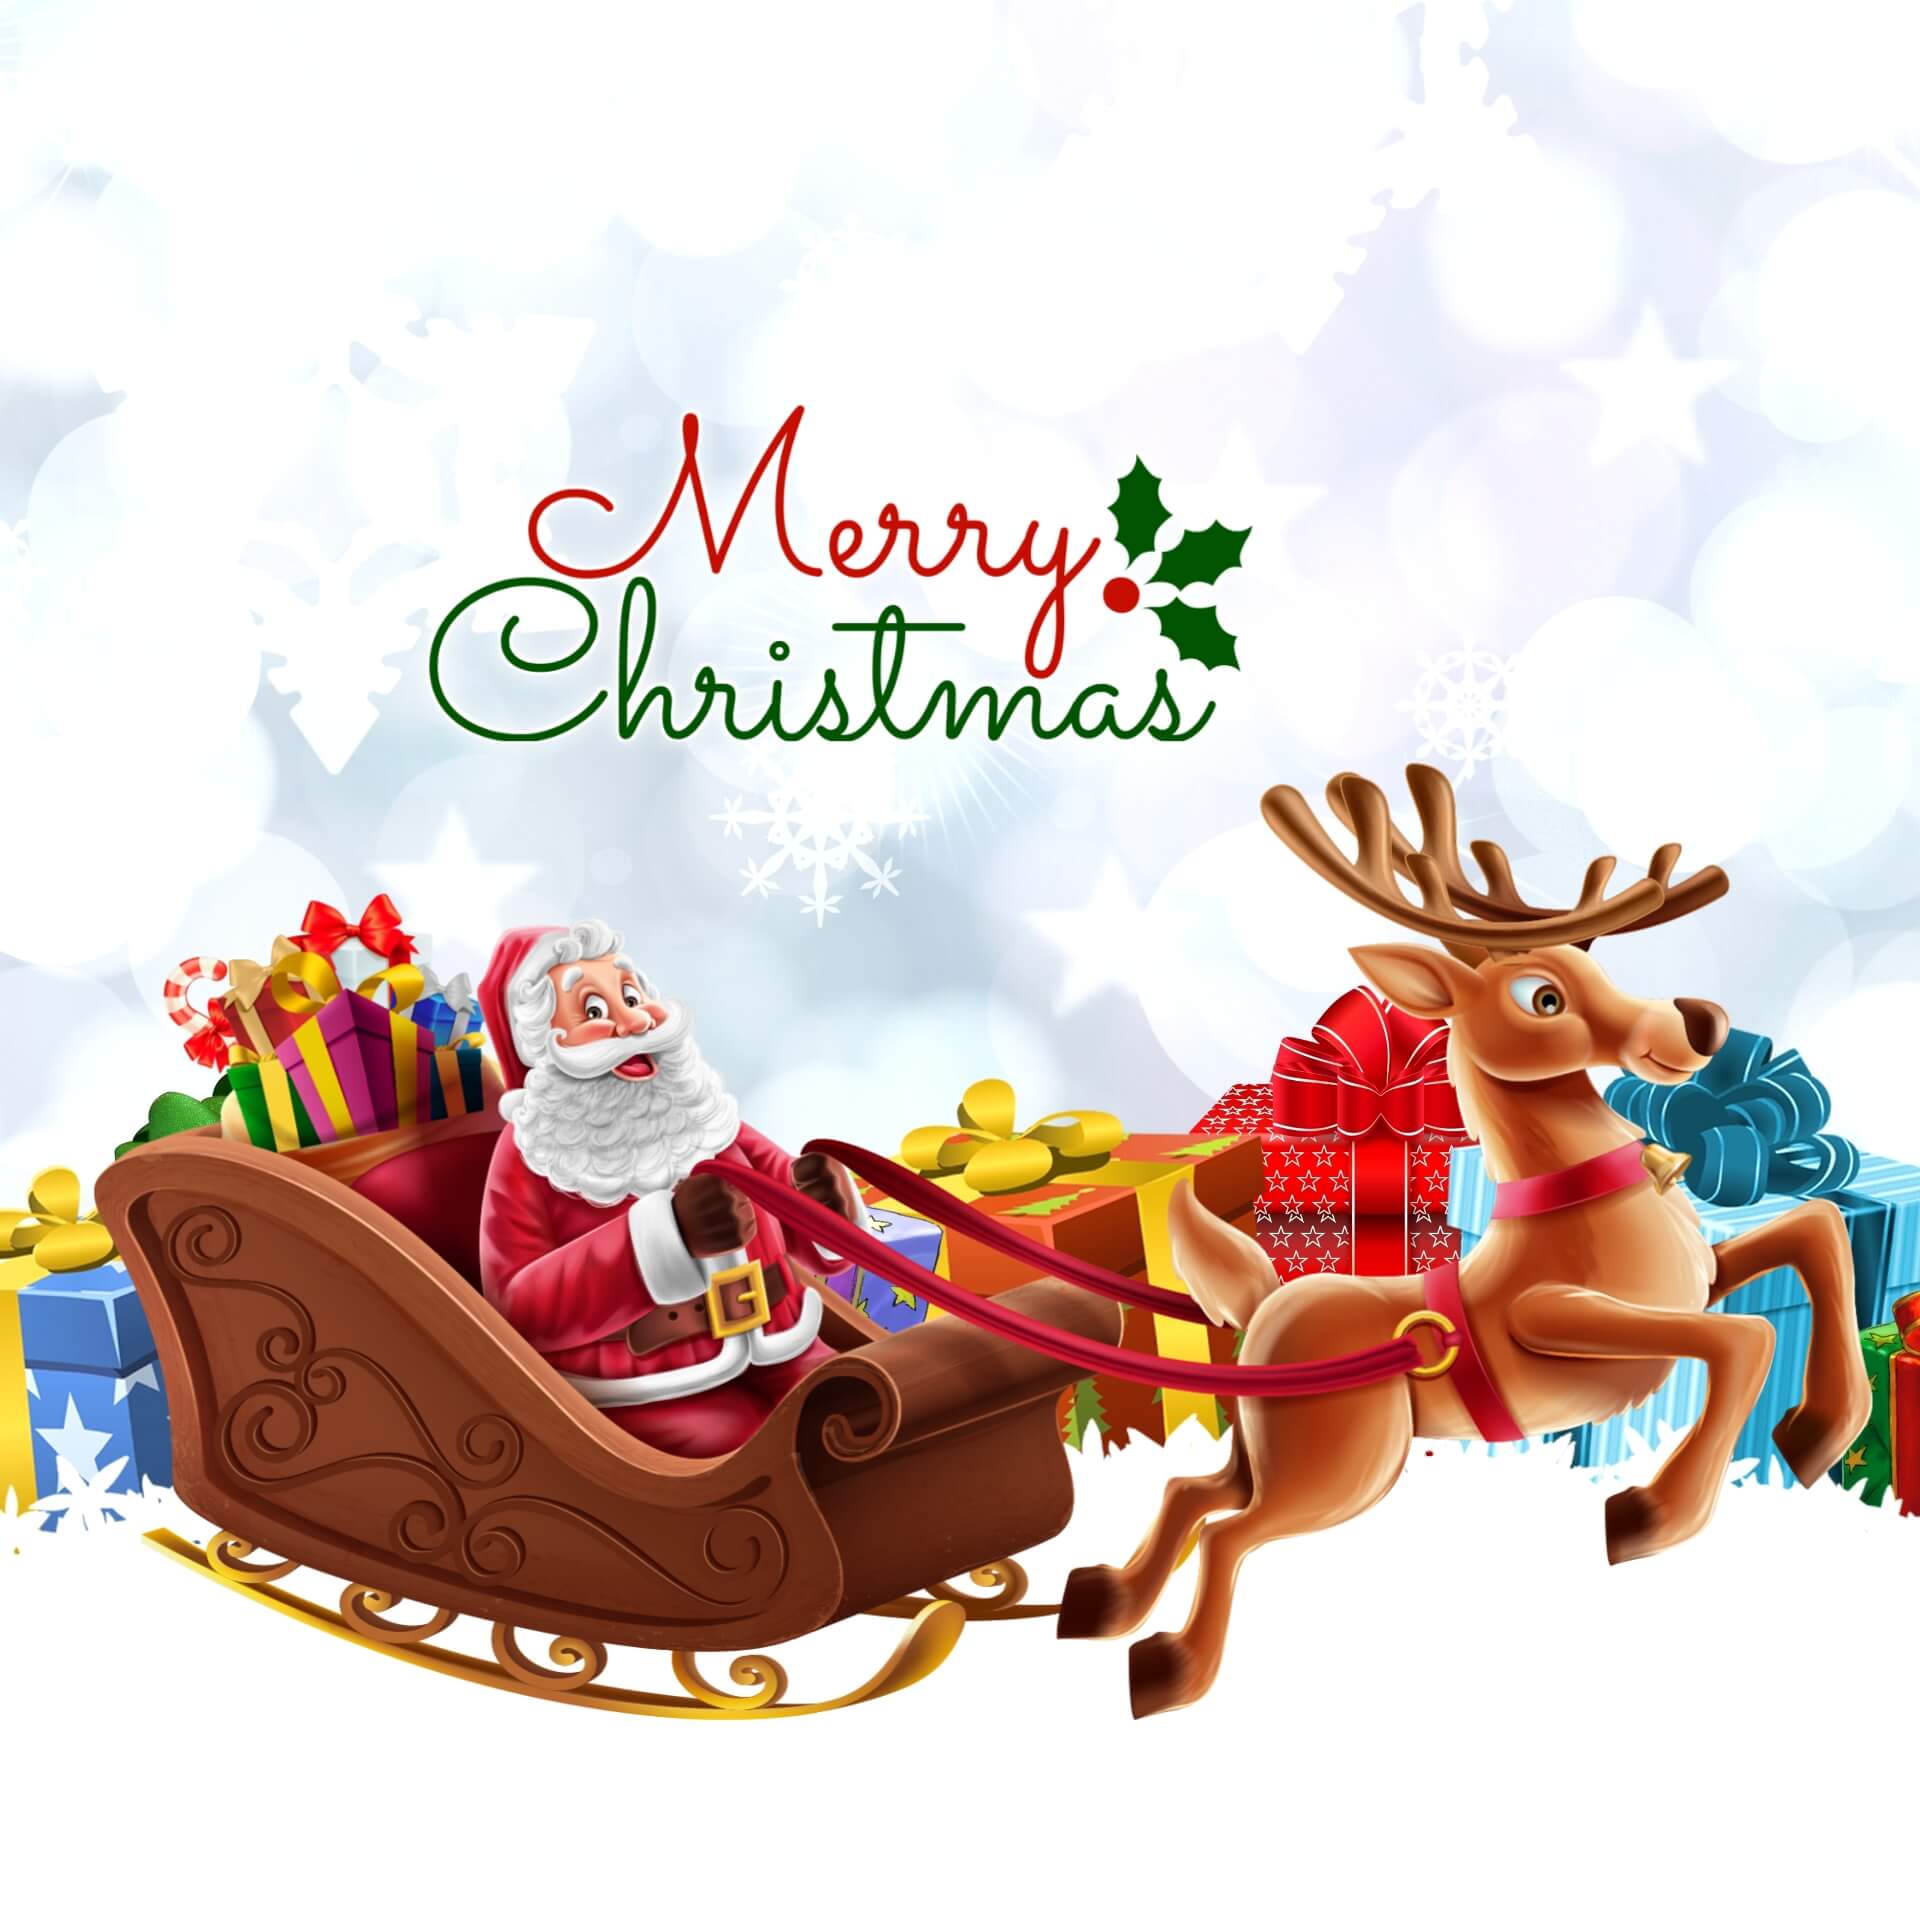 Merry Christmas Images for WhatsApp